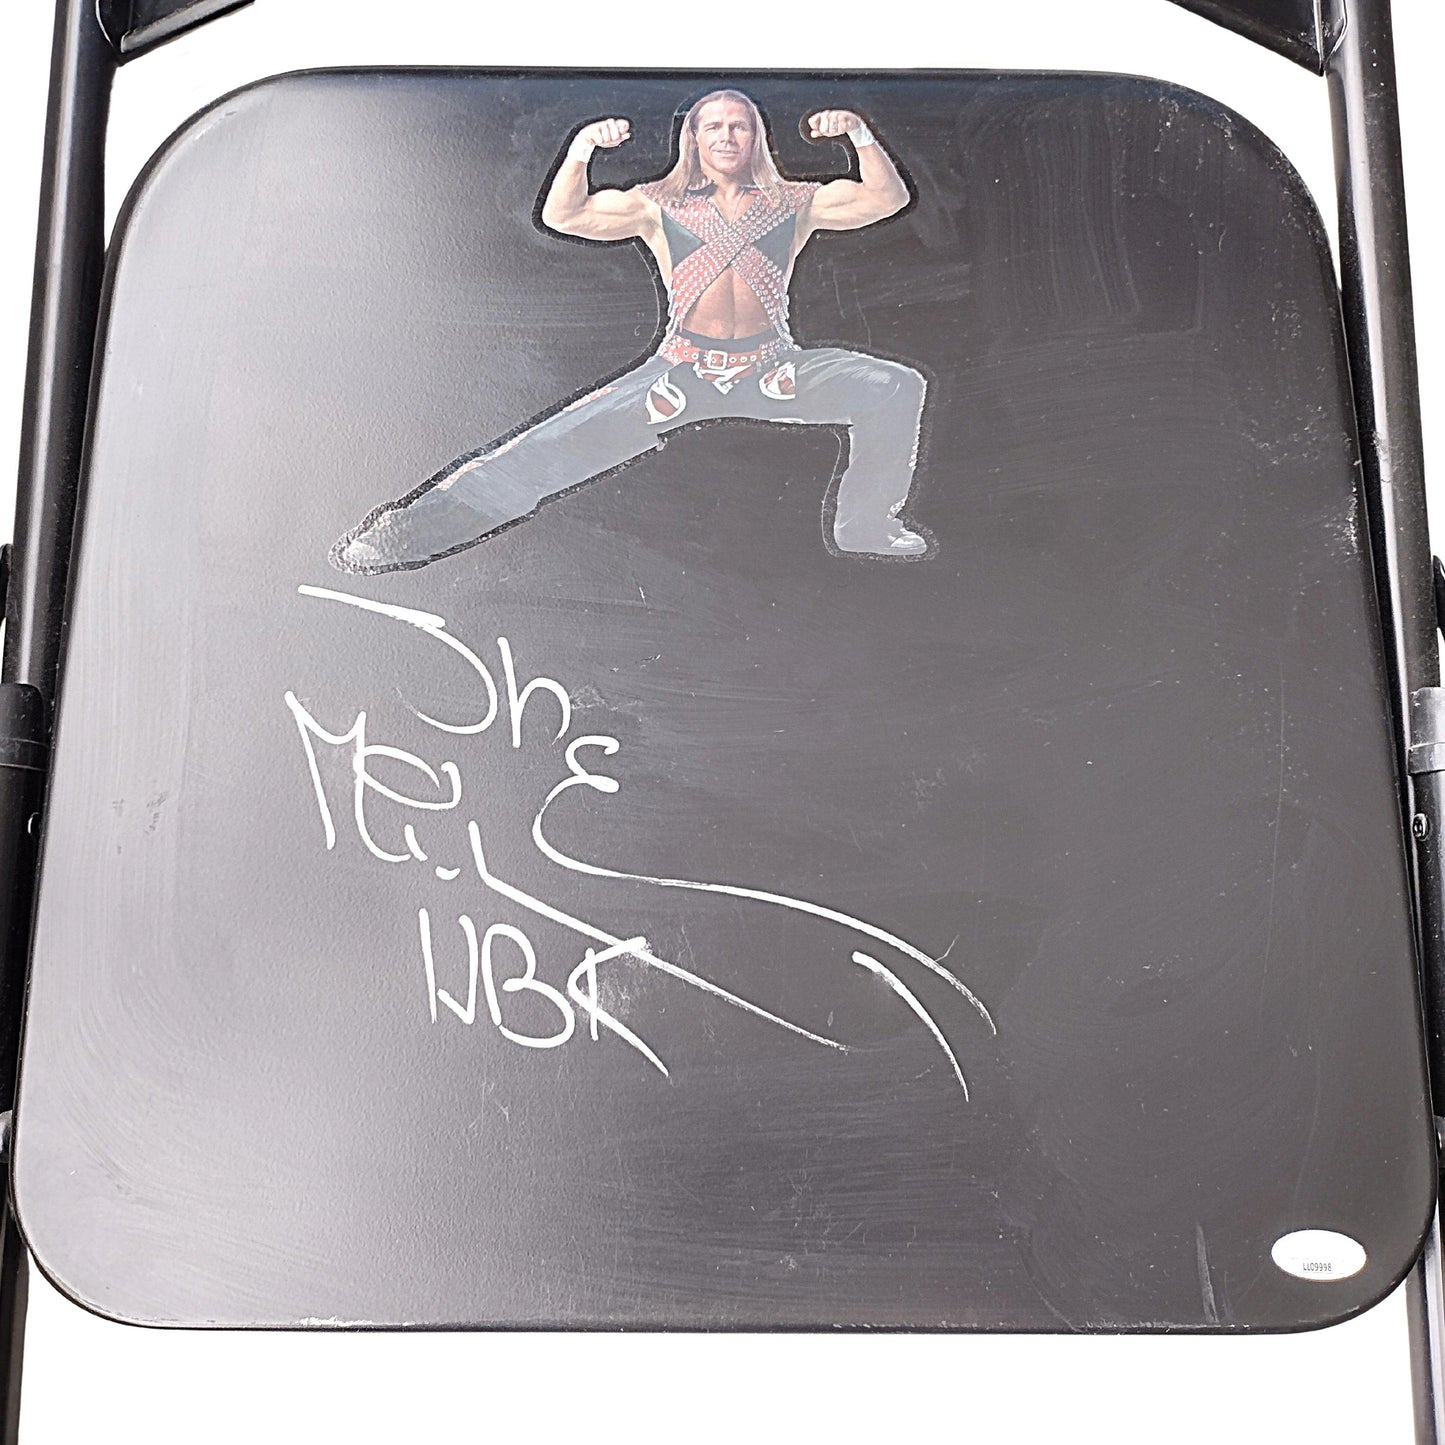 Wrestling- Autographed- Shawn Michaels Signed Full Size Black Steel Folding Chair with HBK Inscription JSA Certified Authentic 102